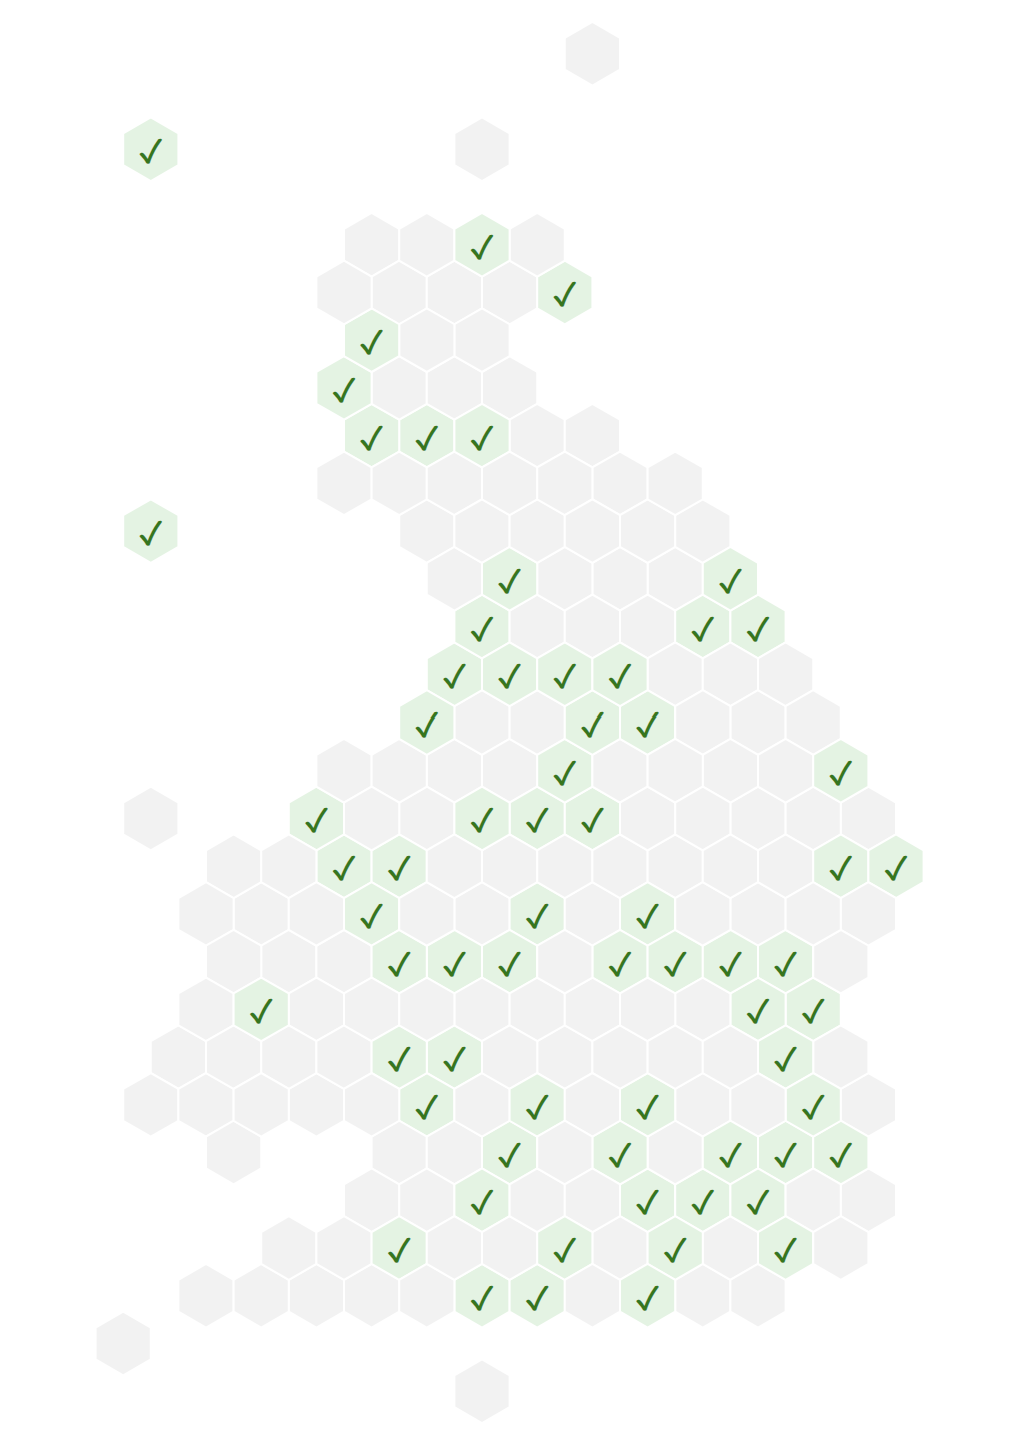 A hexagon map of all public library services in the UK who have signed the Green Manifesto showing about a quarter or so